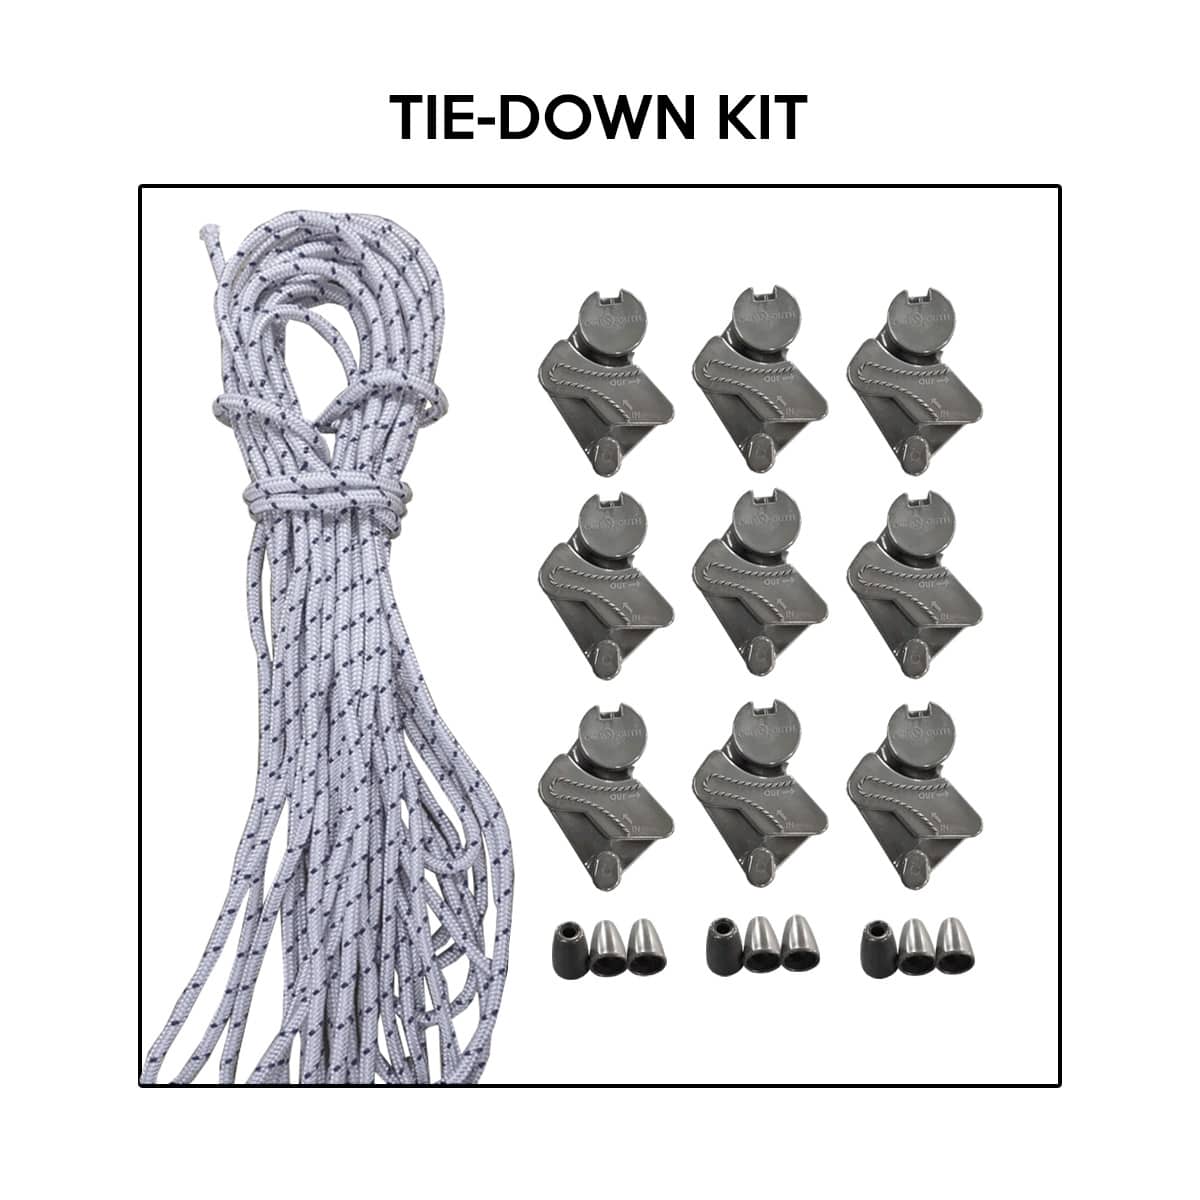 Tie-Down Kit with components